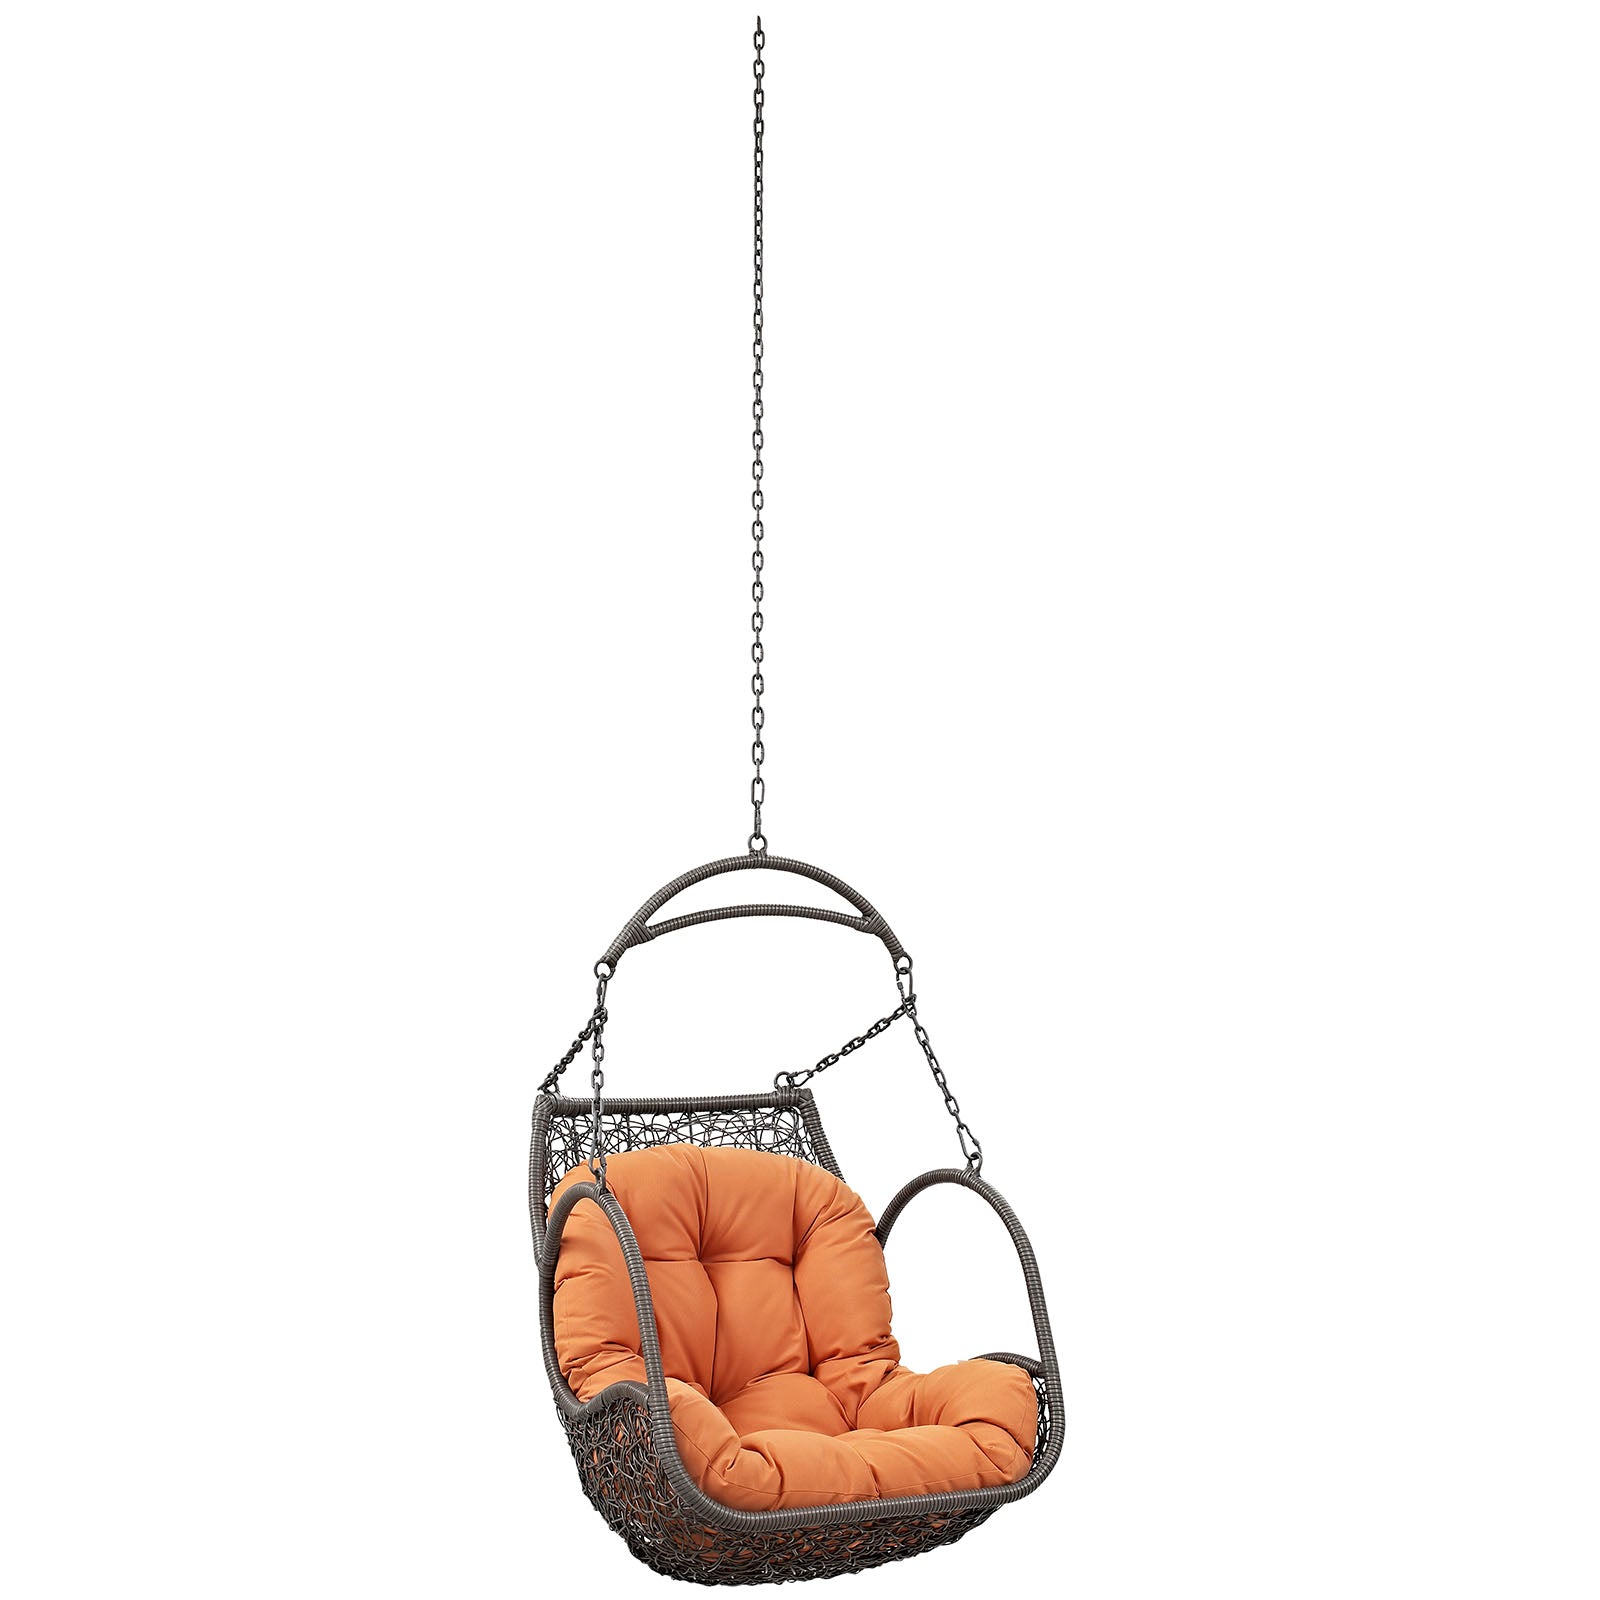 Arbor Outdoor Patio Swing Chair Without Stand-Outdoor Swing Chair-Modway-Wall2Wall Furnishings